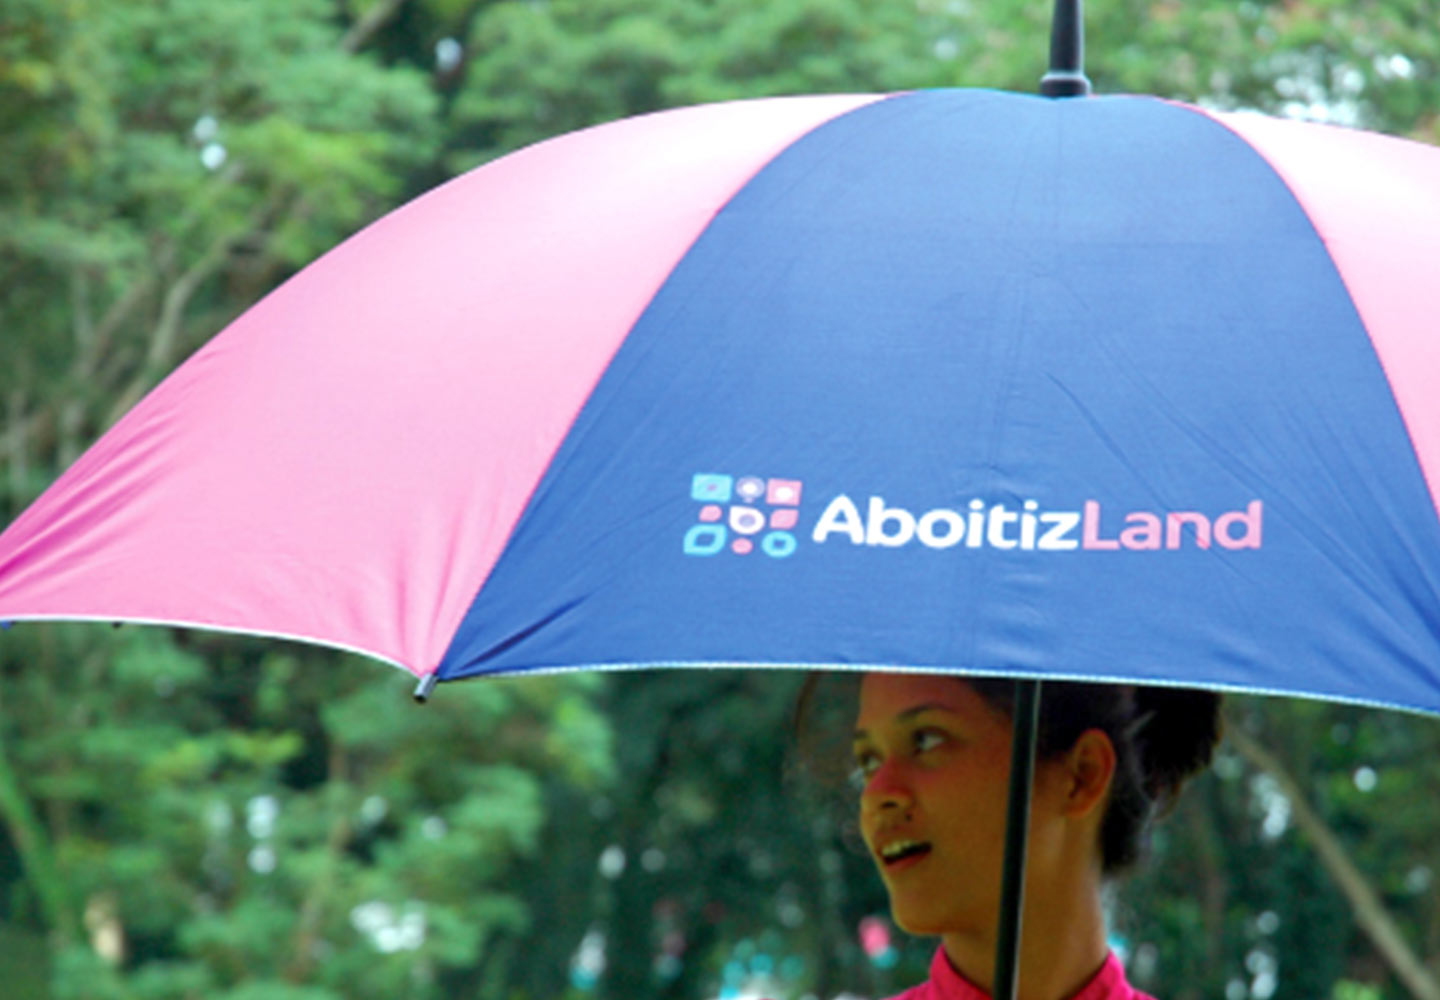 Brand consultancy in Real Estate Industry. Promotional Materials for AboitizLand.